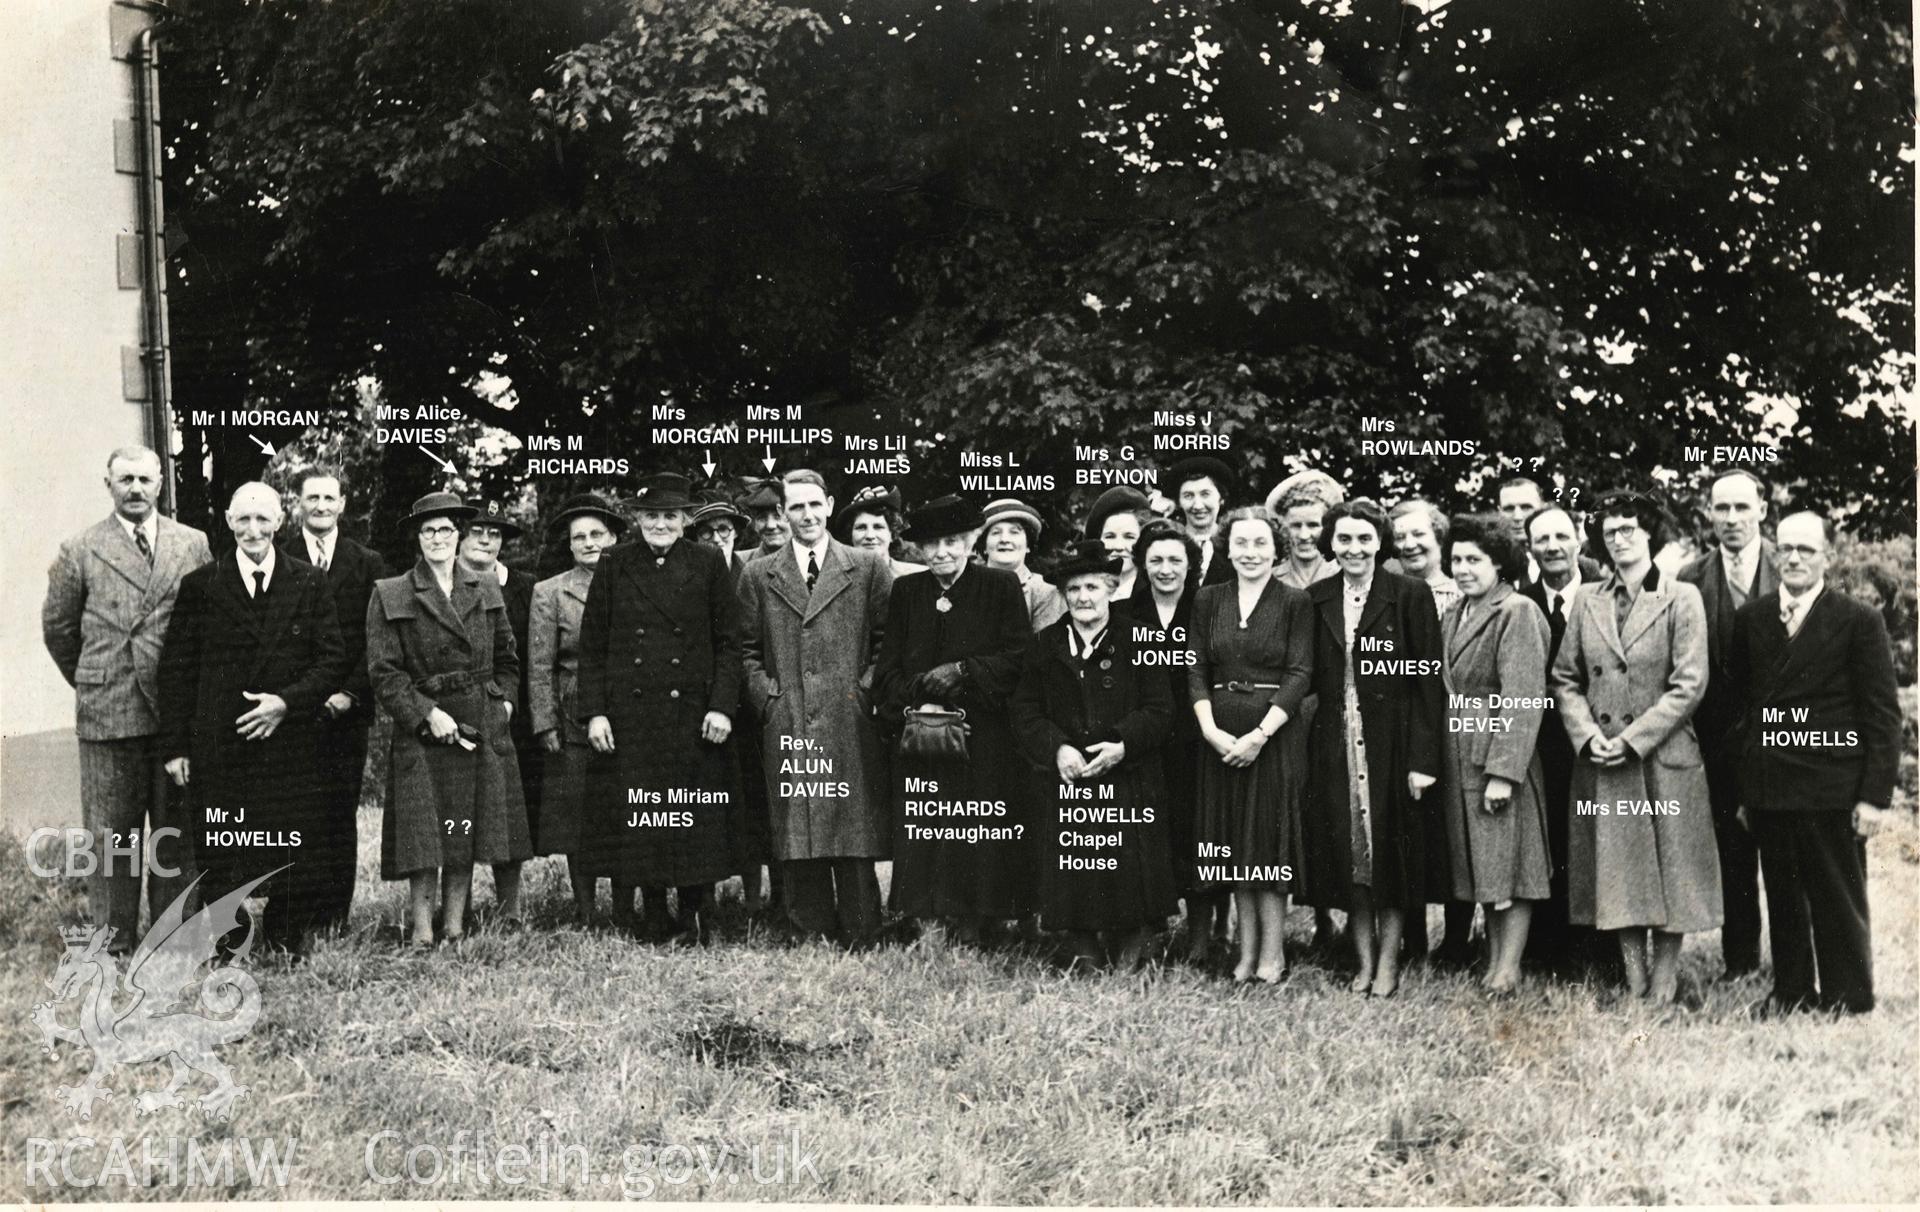 'Photo showing the Bwlchgwynt congregation, in the 1950’s, just outside the Chapel, the Minister the Rev., Alun Davies is present.'